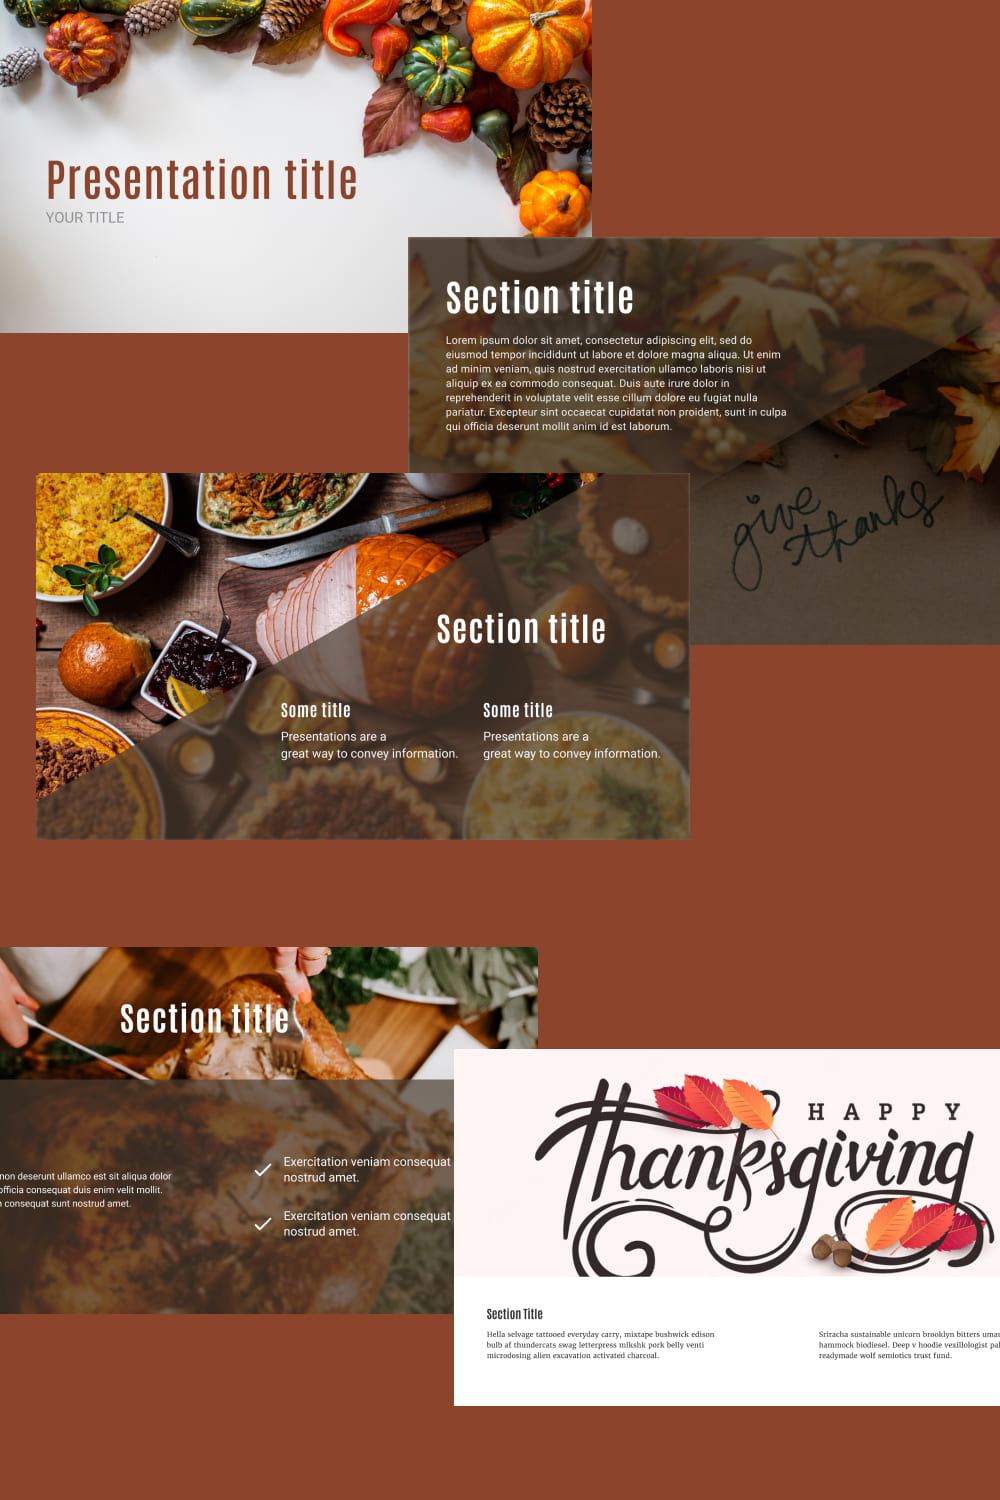 Pint Preview Free Thanksgiving Background Images for Powerpoint.